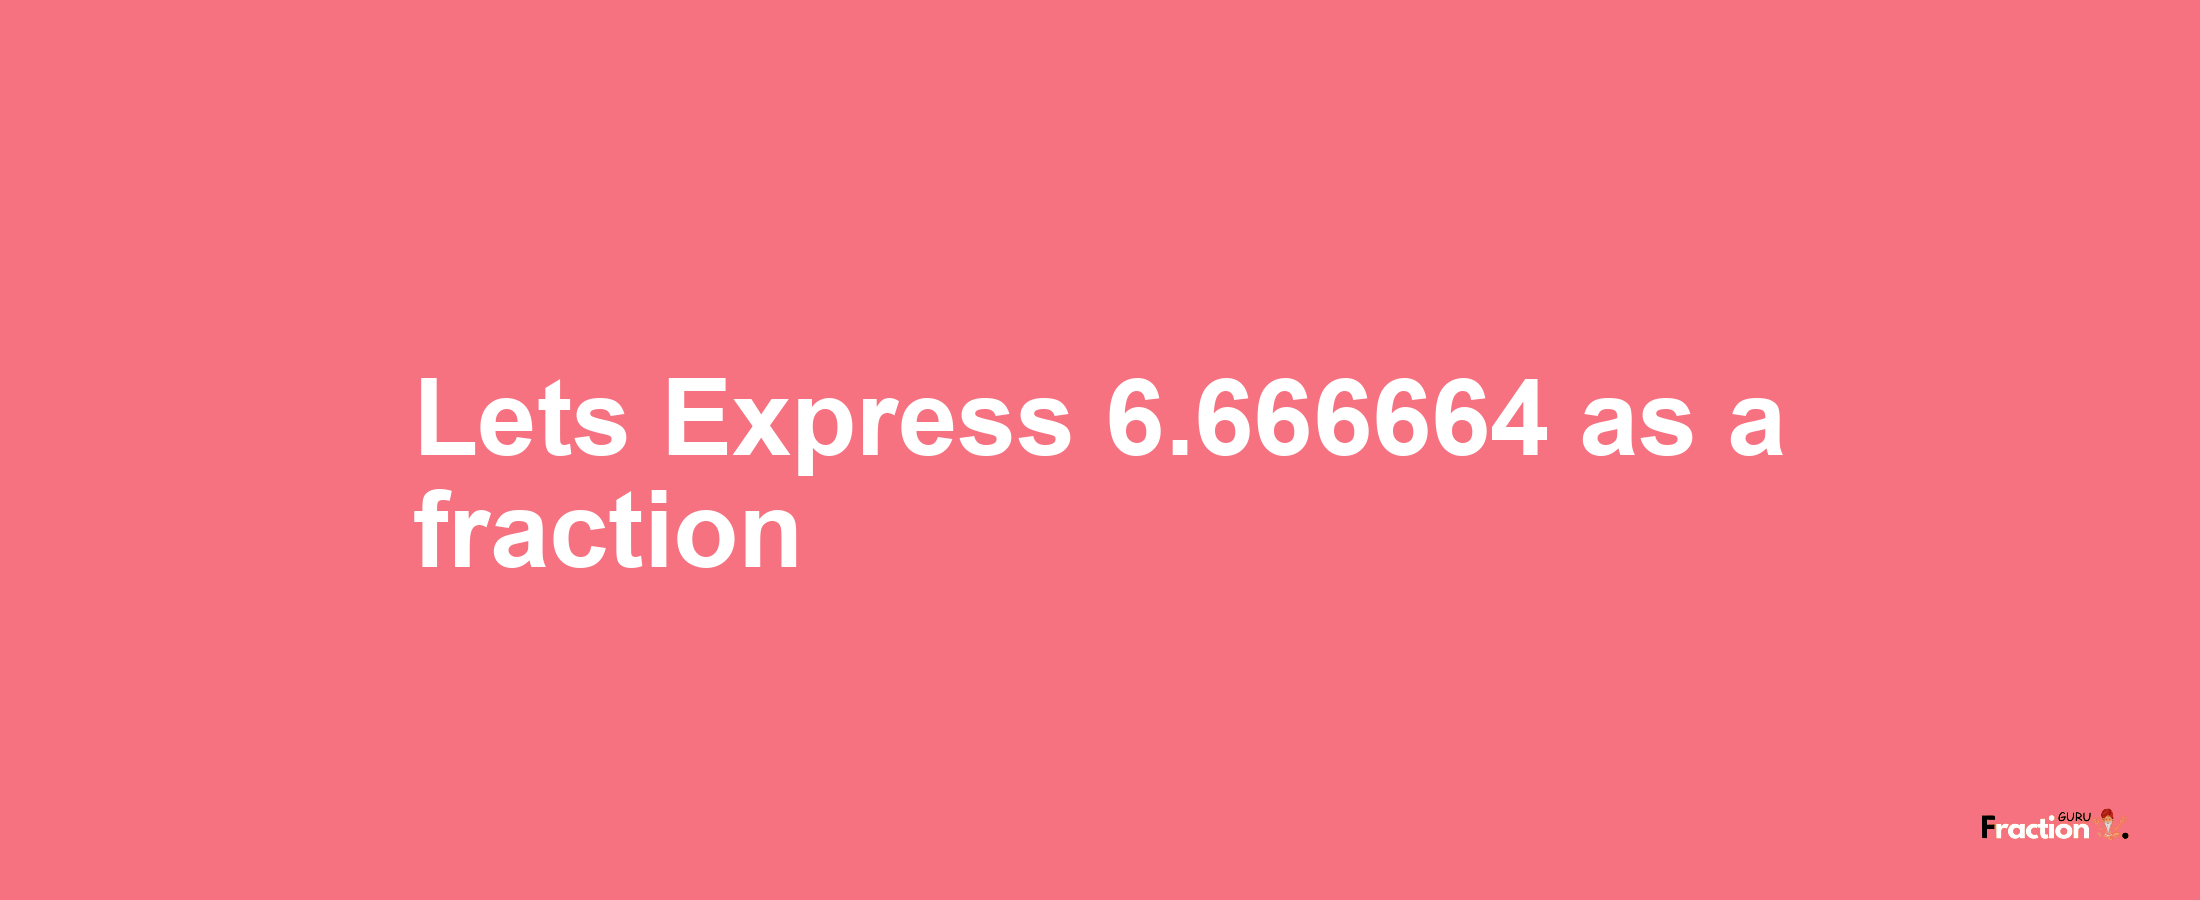 Lets Express 6.666664 as afraction